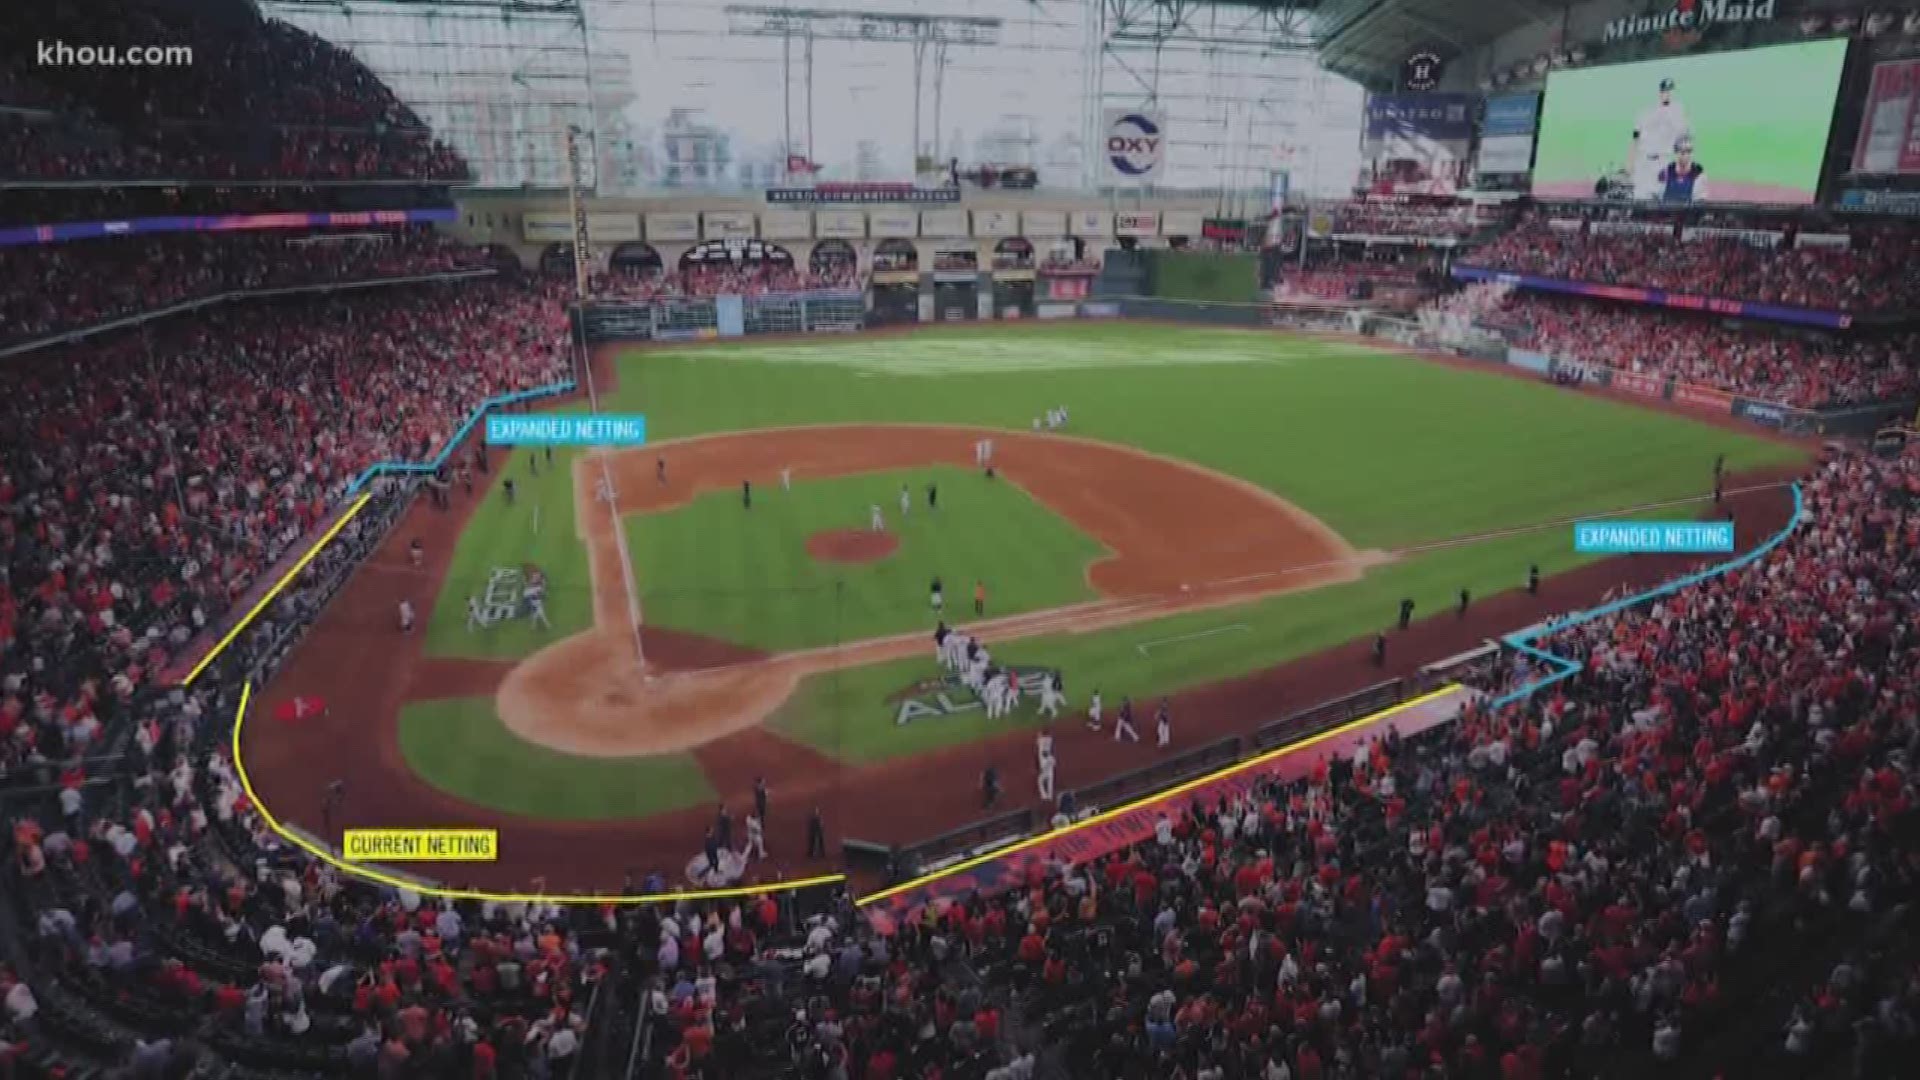 The protective netting inside Minute Maid Park will be upgraded and extended to help protect more fans, the Houston Astros announced Thursday.